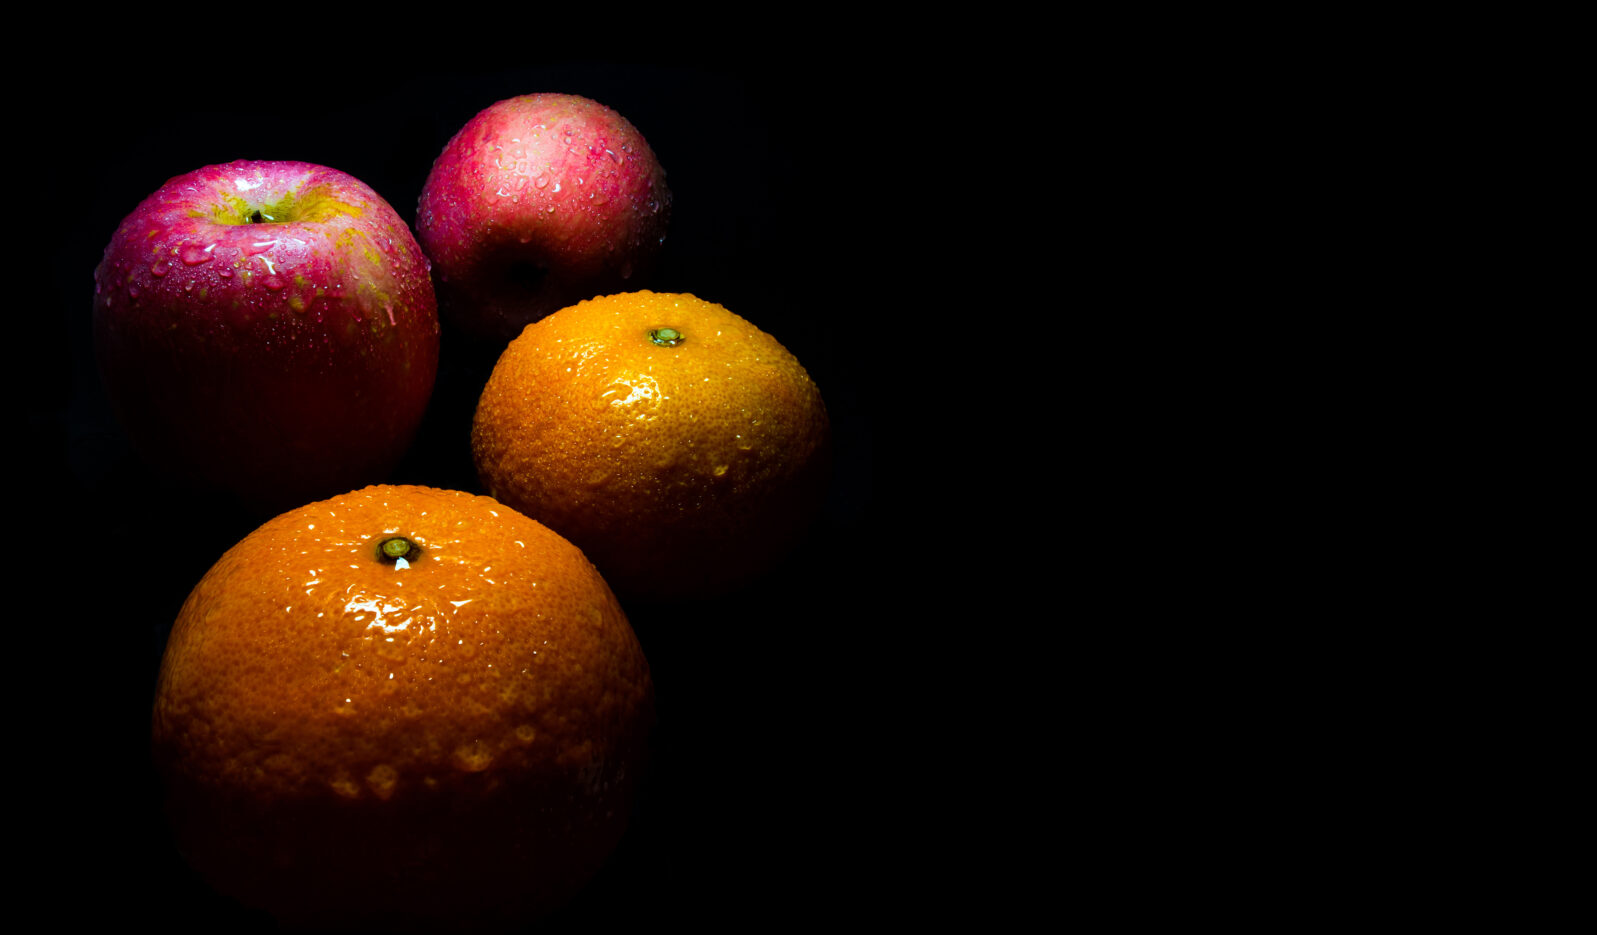 Apples and oranges in shadows